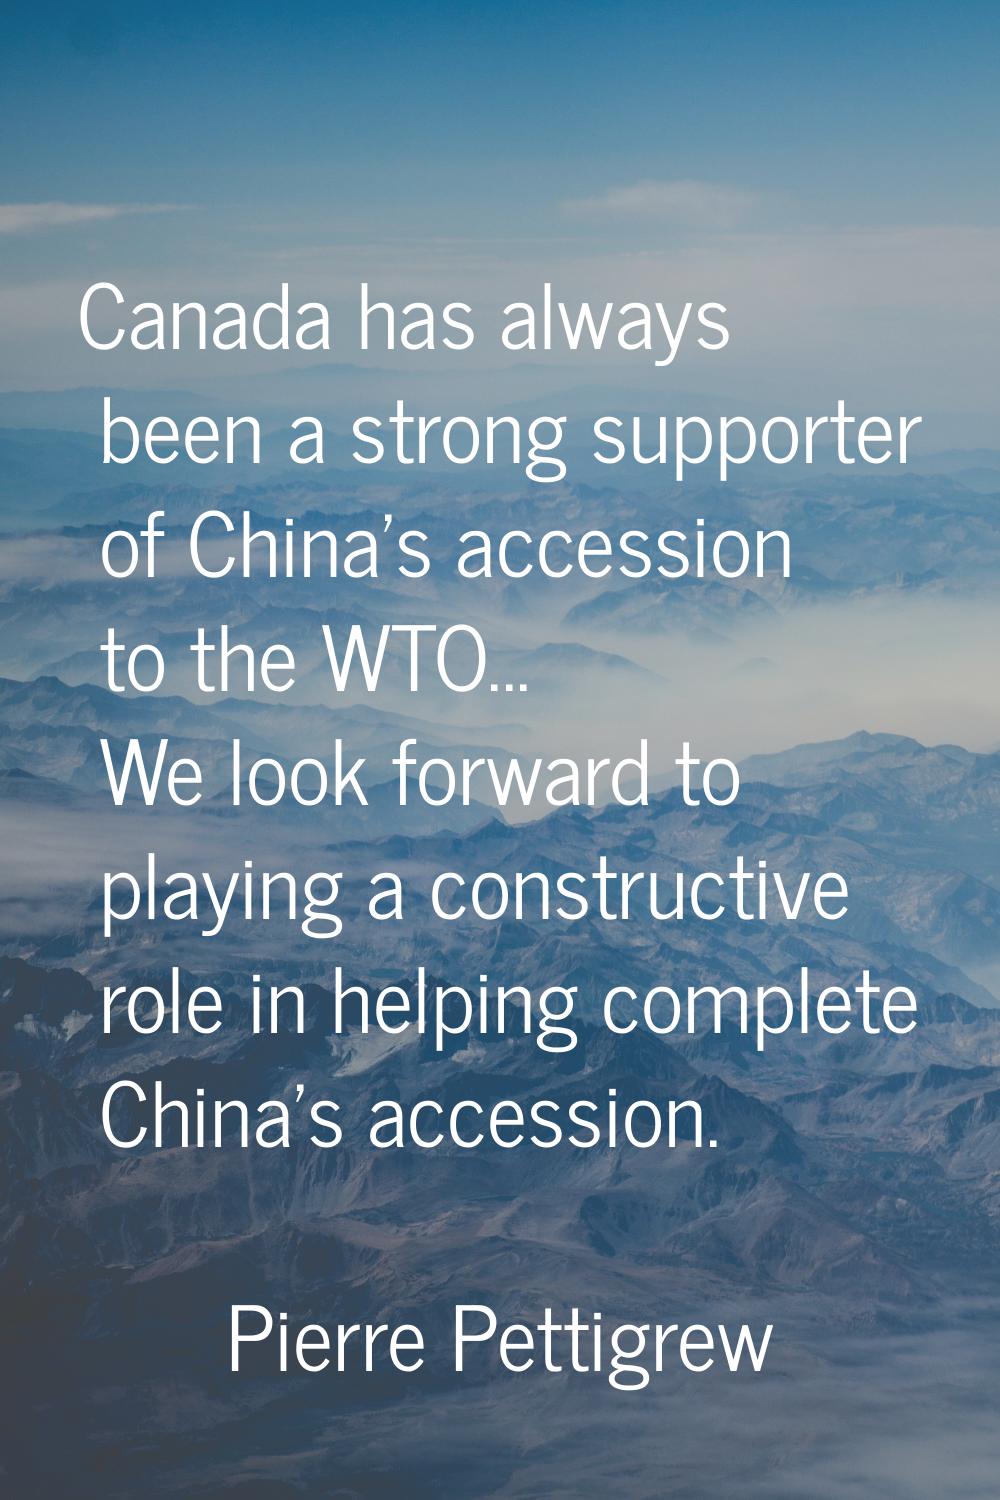 Canada has always been a strong supporter of China's accession to the WTO... We look forward to pla